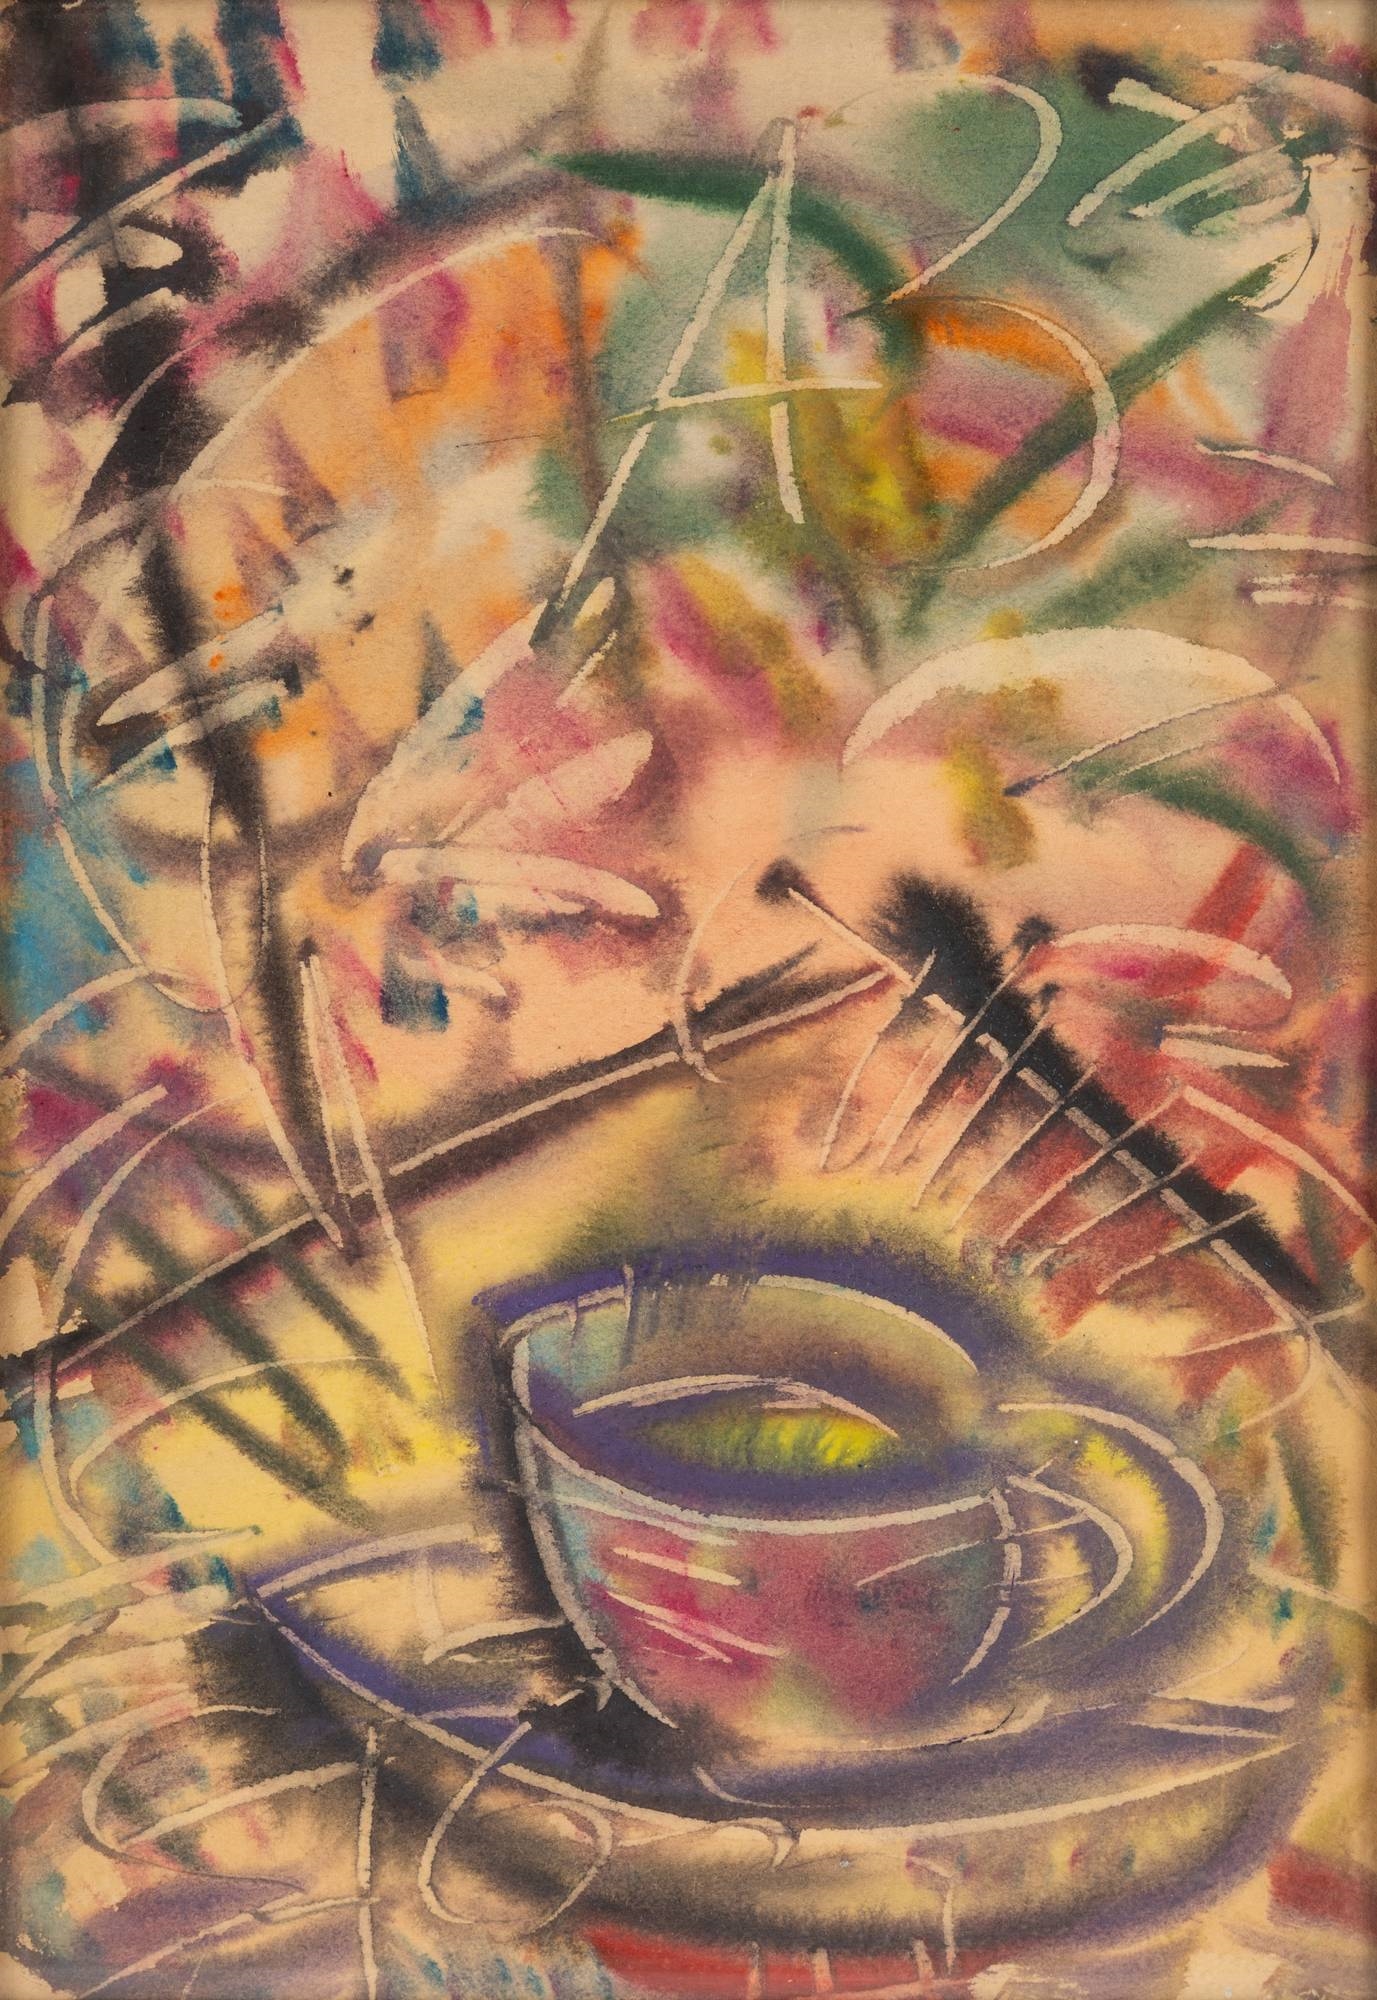 Tea Cup by Anatoly Zverev, 1976